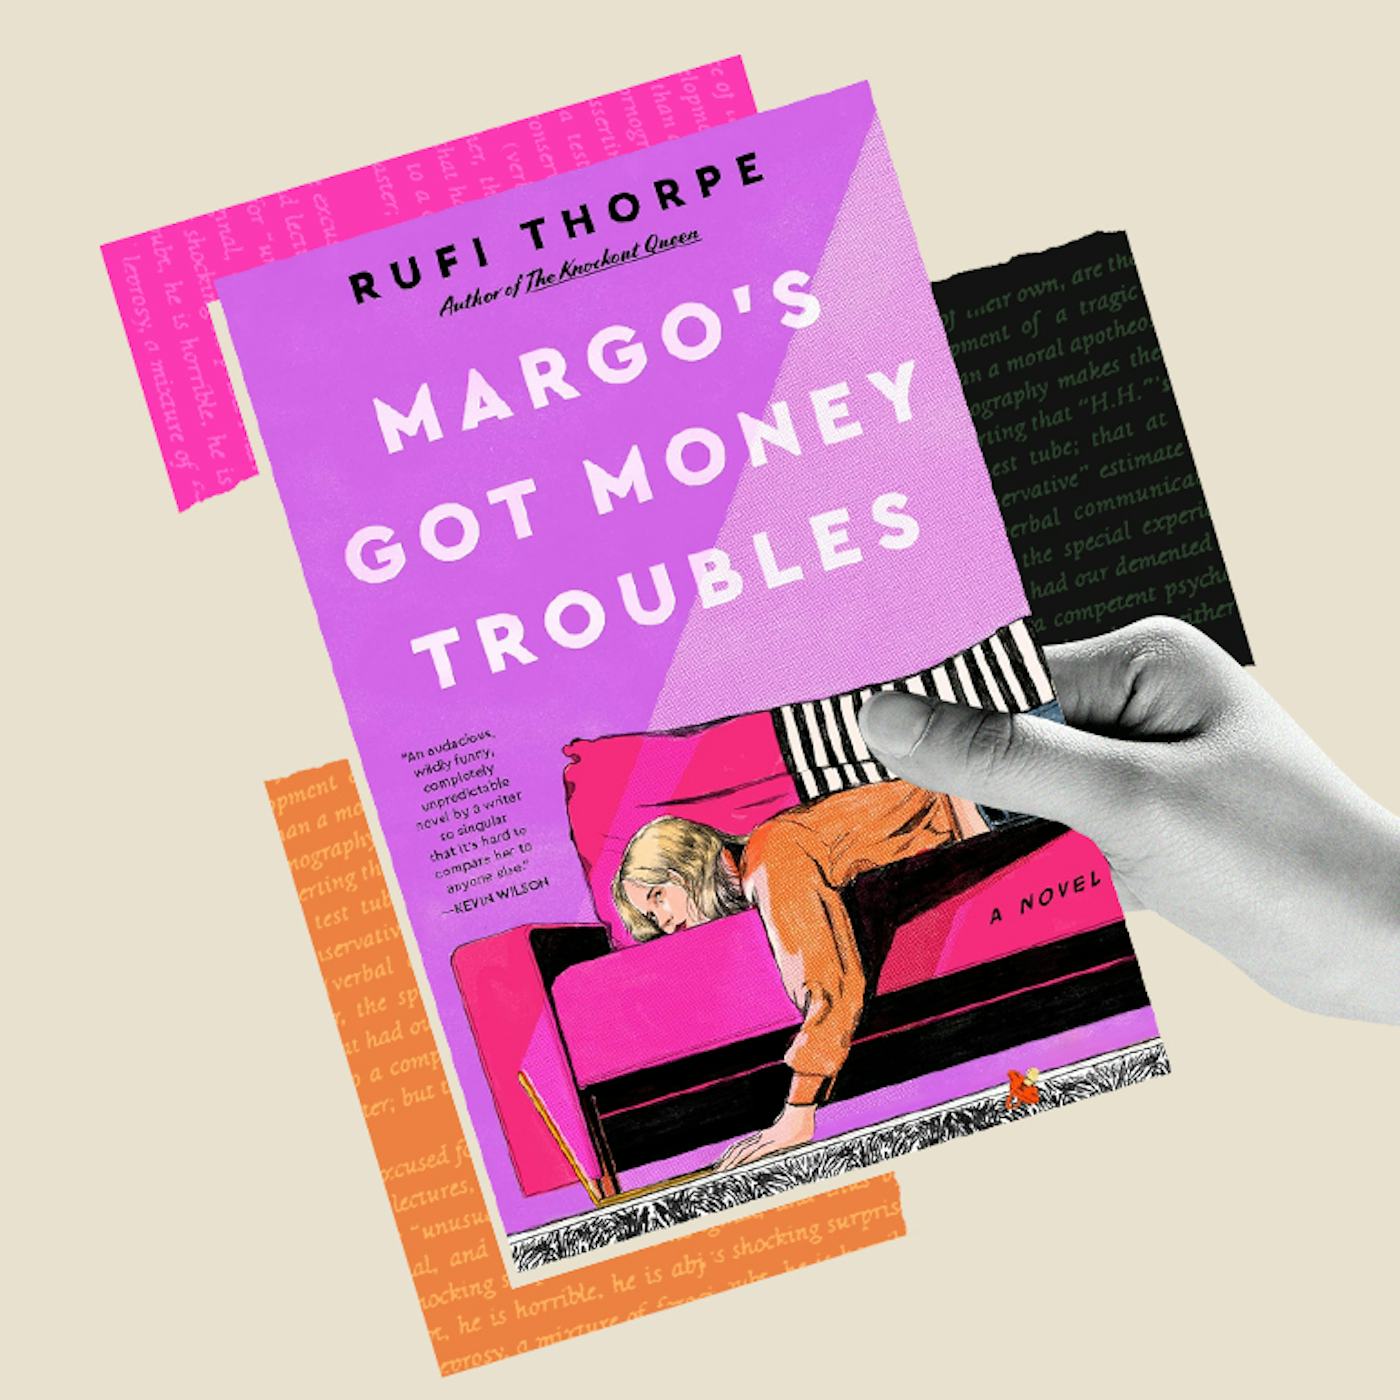 A collage featuring the cover of the book "Margo's Got Money Troubles" by Rufi Thorpe with an illustration of a woman on a pink couch.